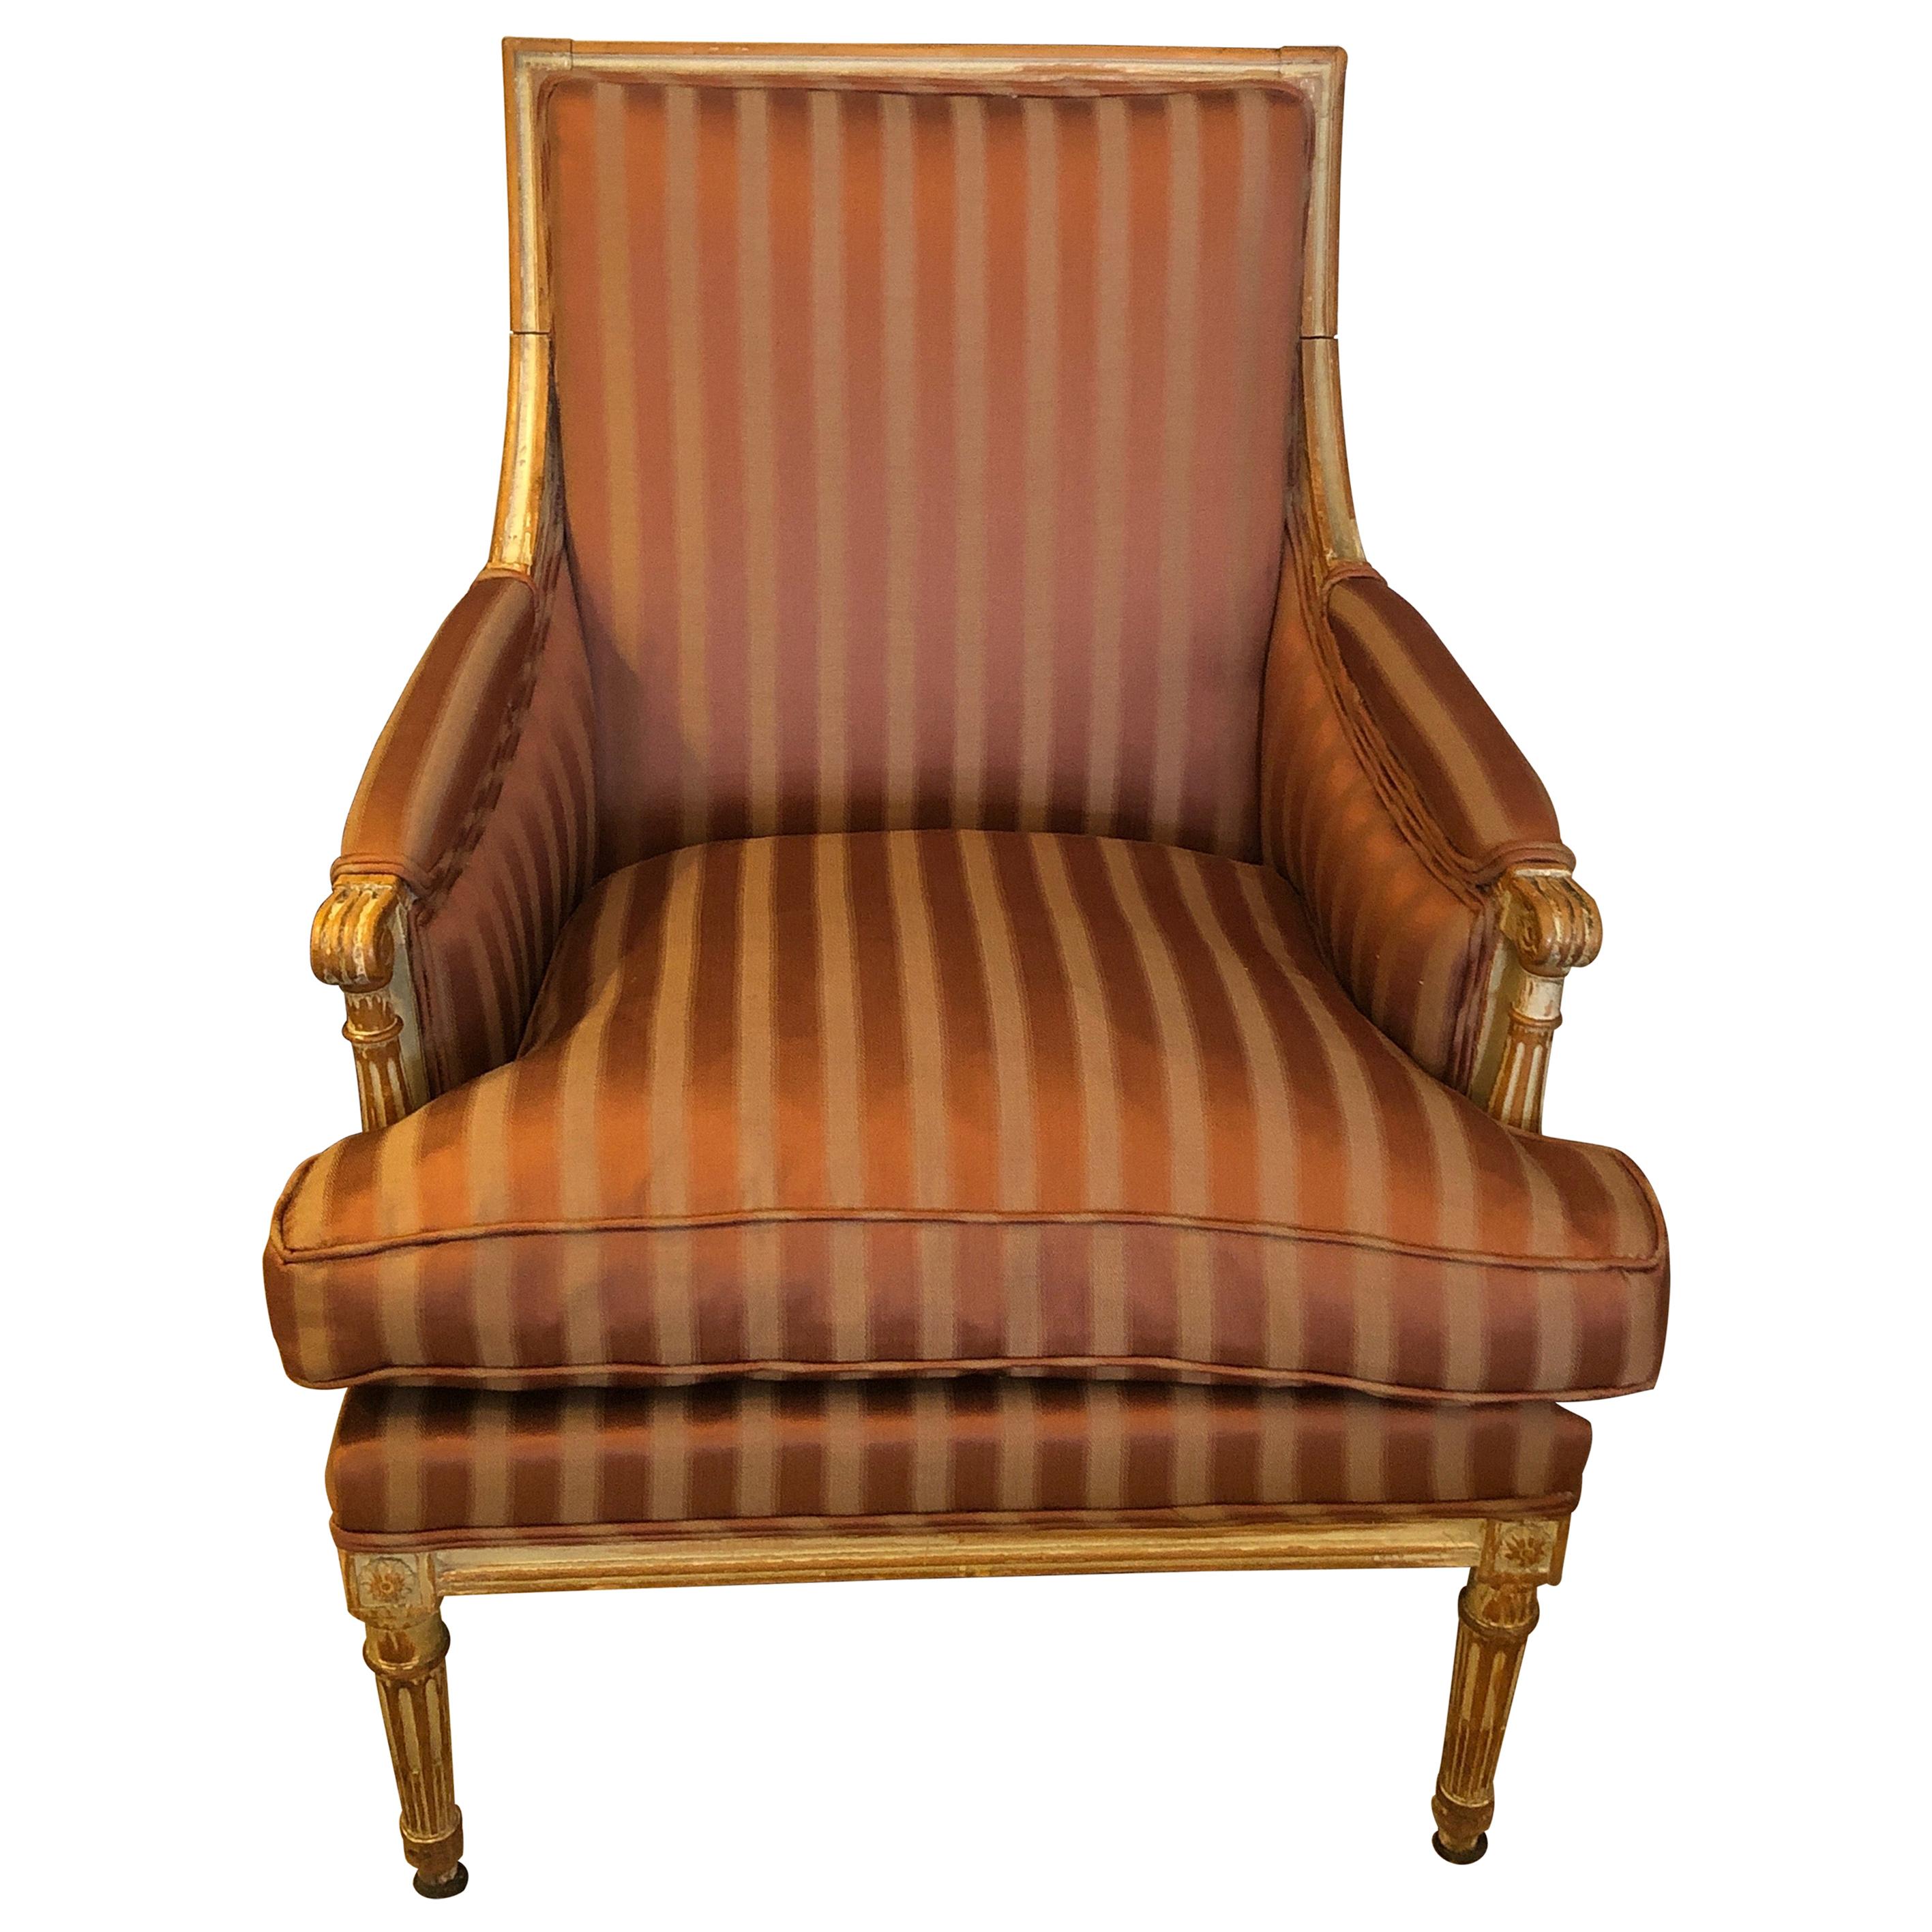 19th Century Louis XVI Bergère Club Chair with Rose Tarlow Upholstery